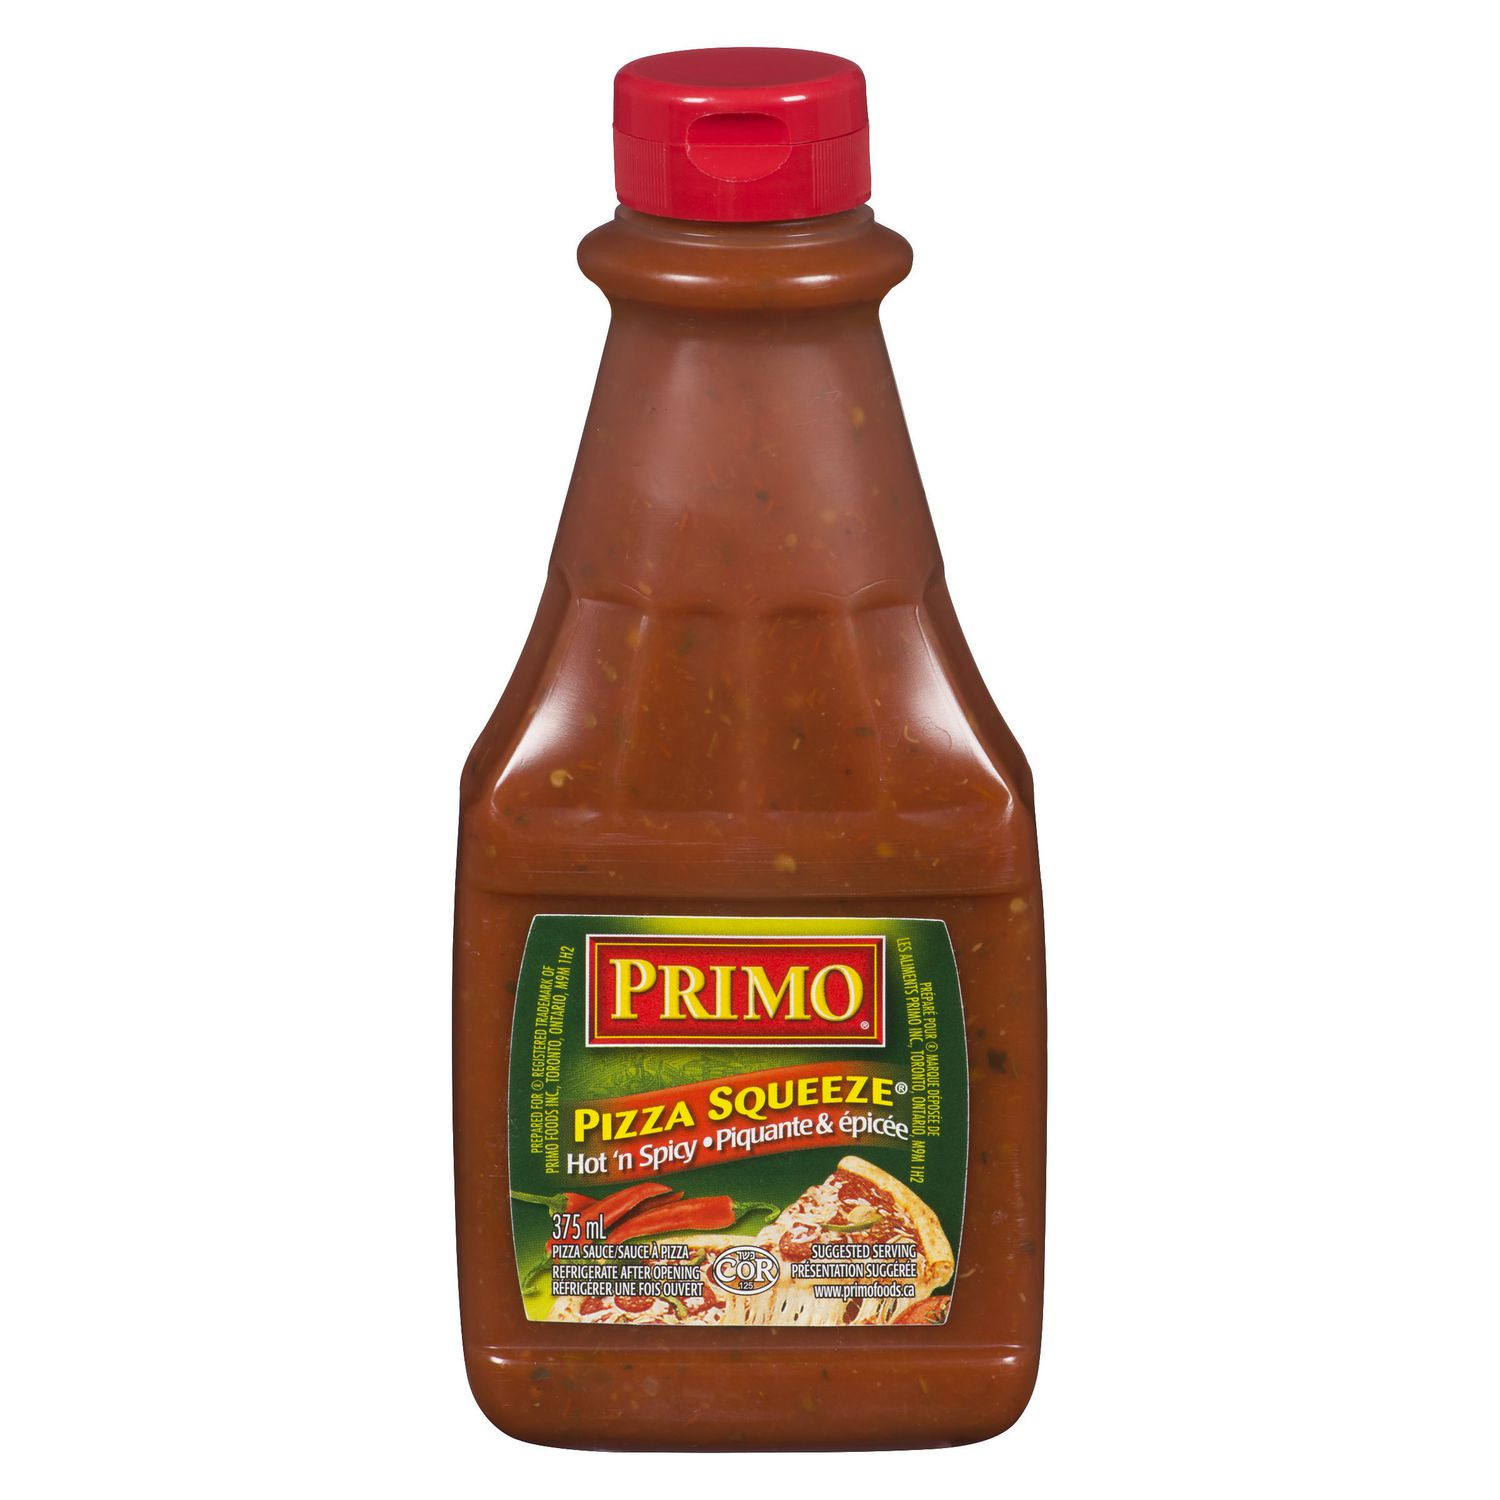 Spicy Pizza Sauce New Primo Pizza Squeeze Hot N Spicy Pizza Sauce